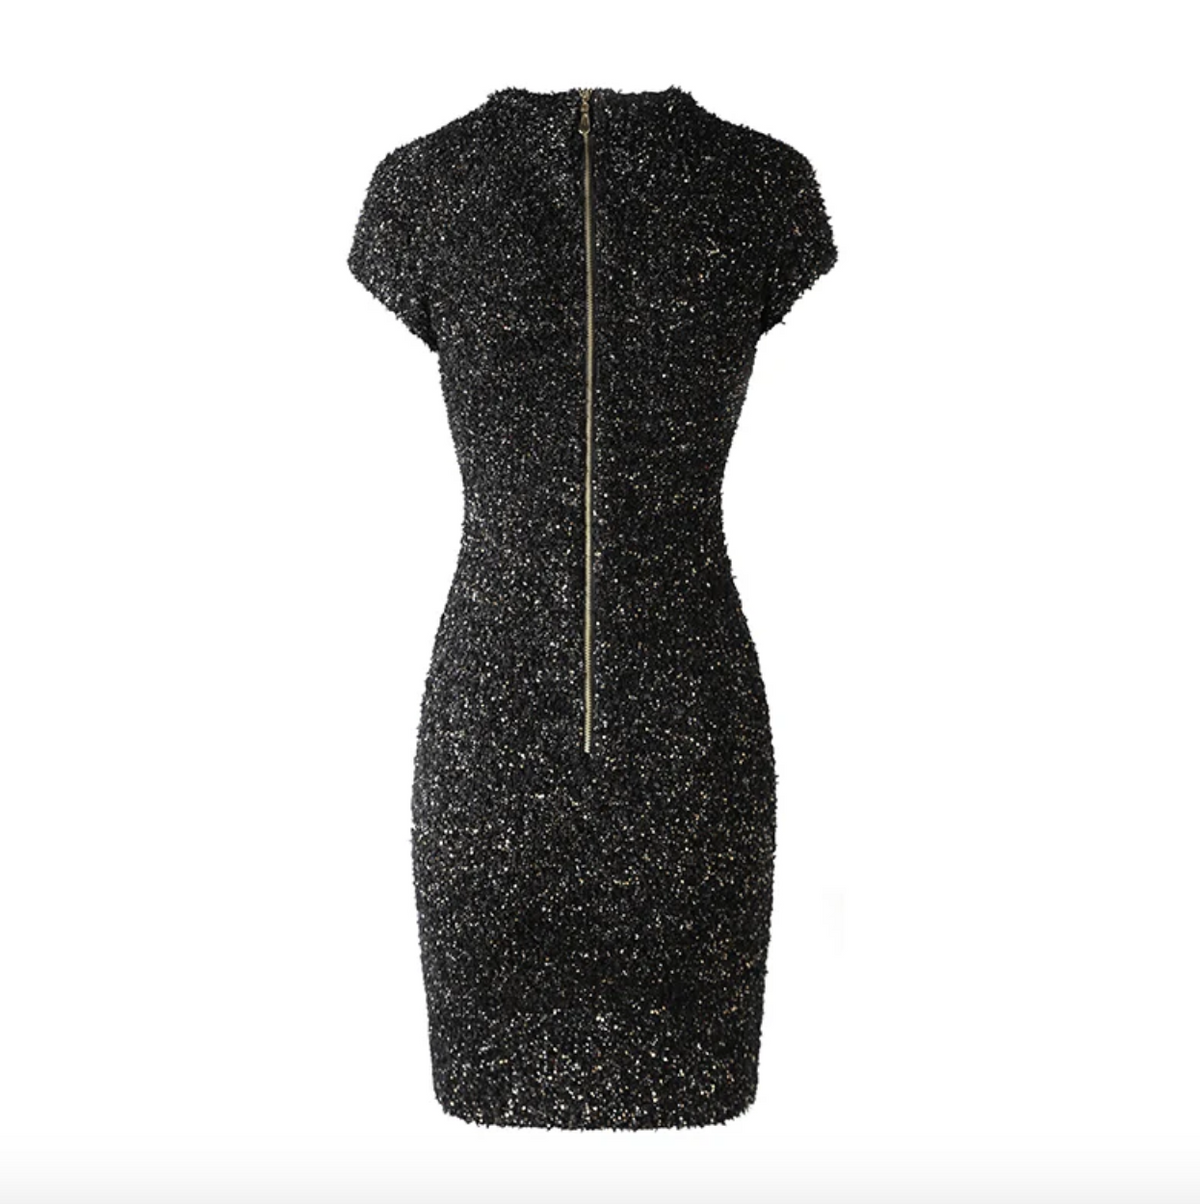 The Natalynska Angellina dress is a stunning short sleeve, mini dress with gold button details and boucle, clustered fabric with glittery threads. balmain inspired back